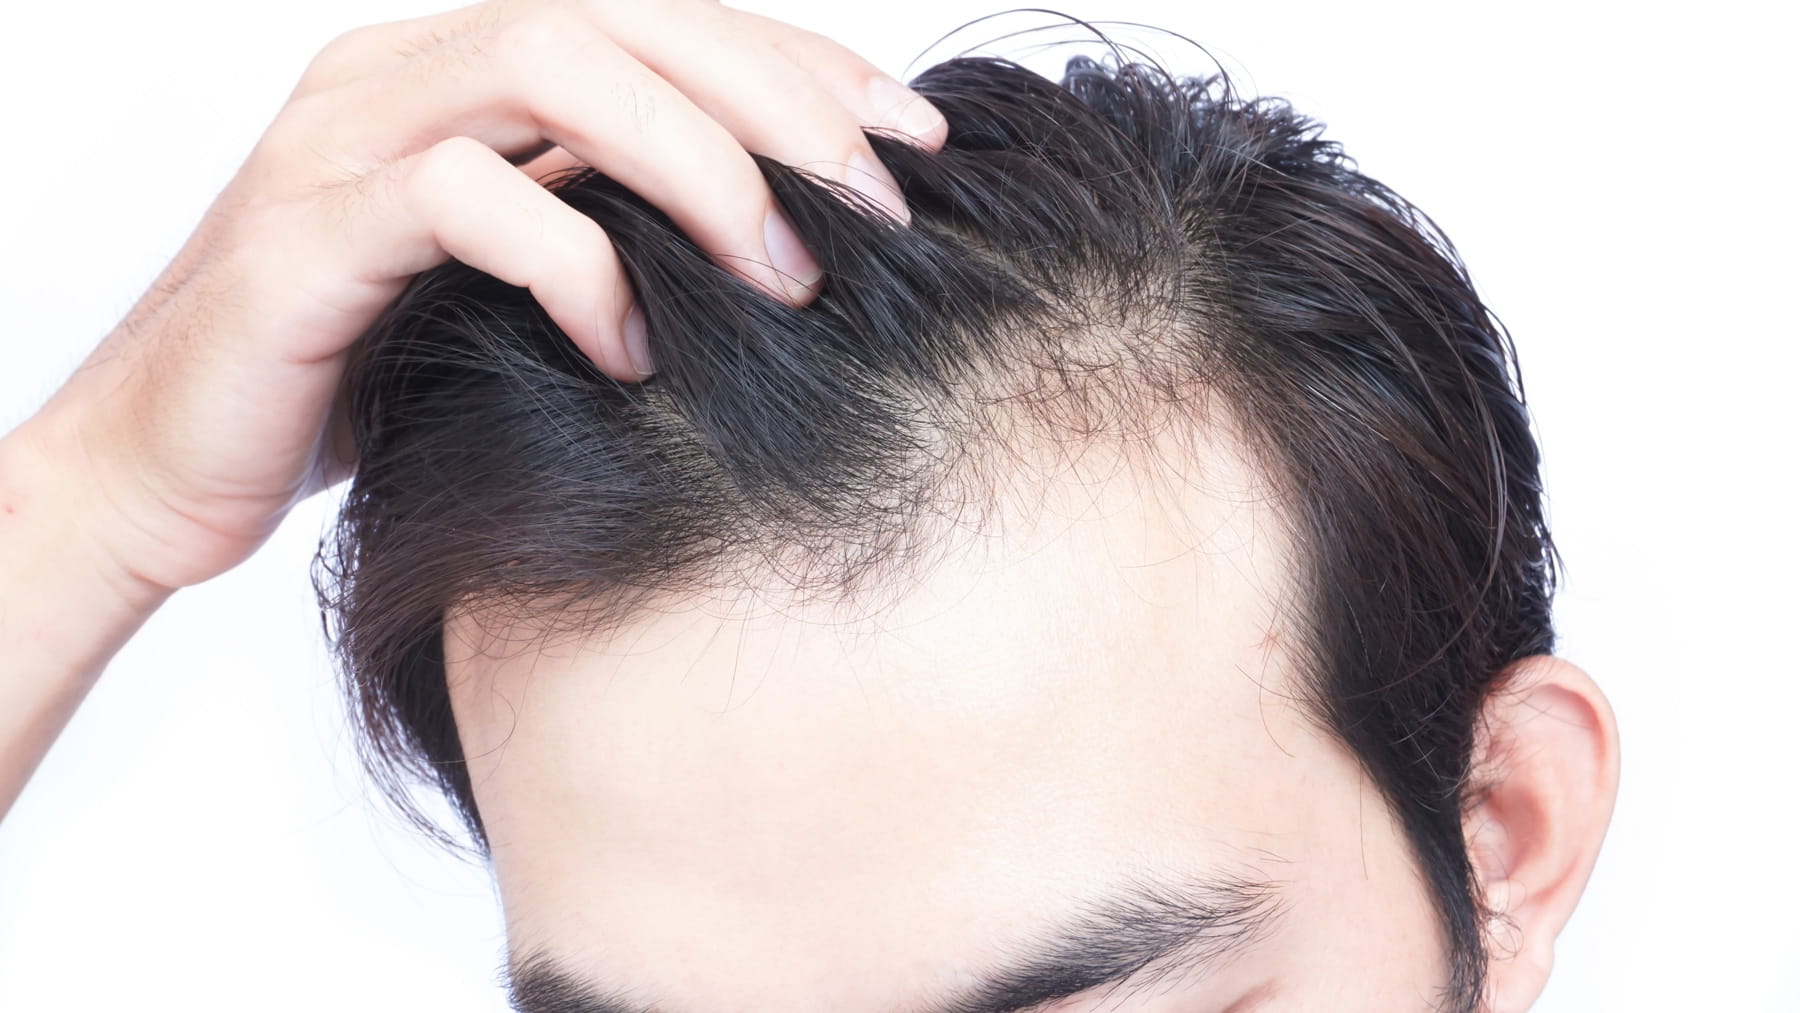 Why Am I Losing Hair and How Can I Stop It? - Healthy You